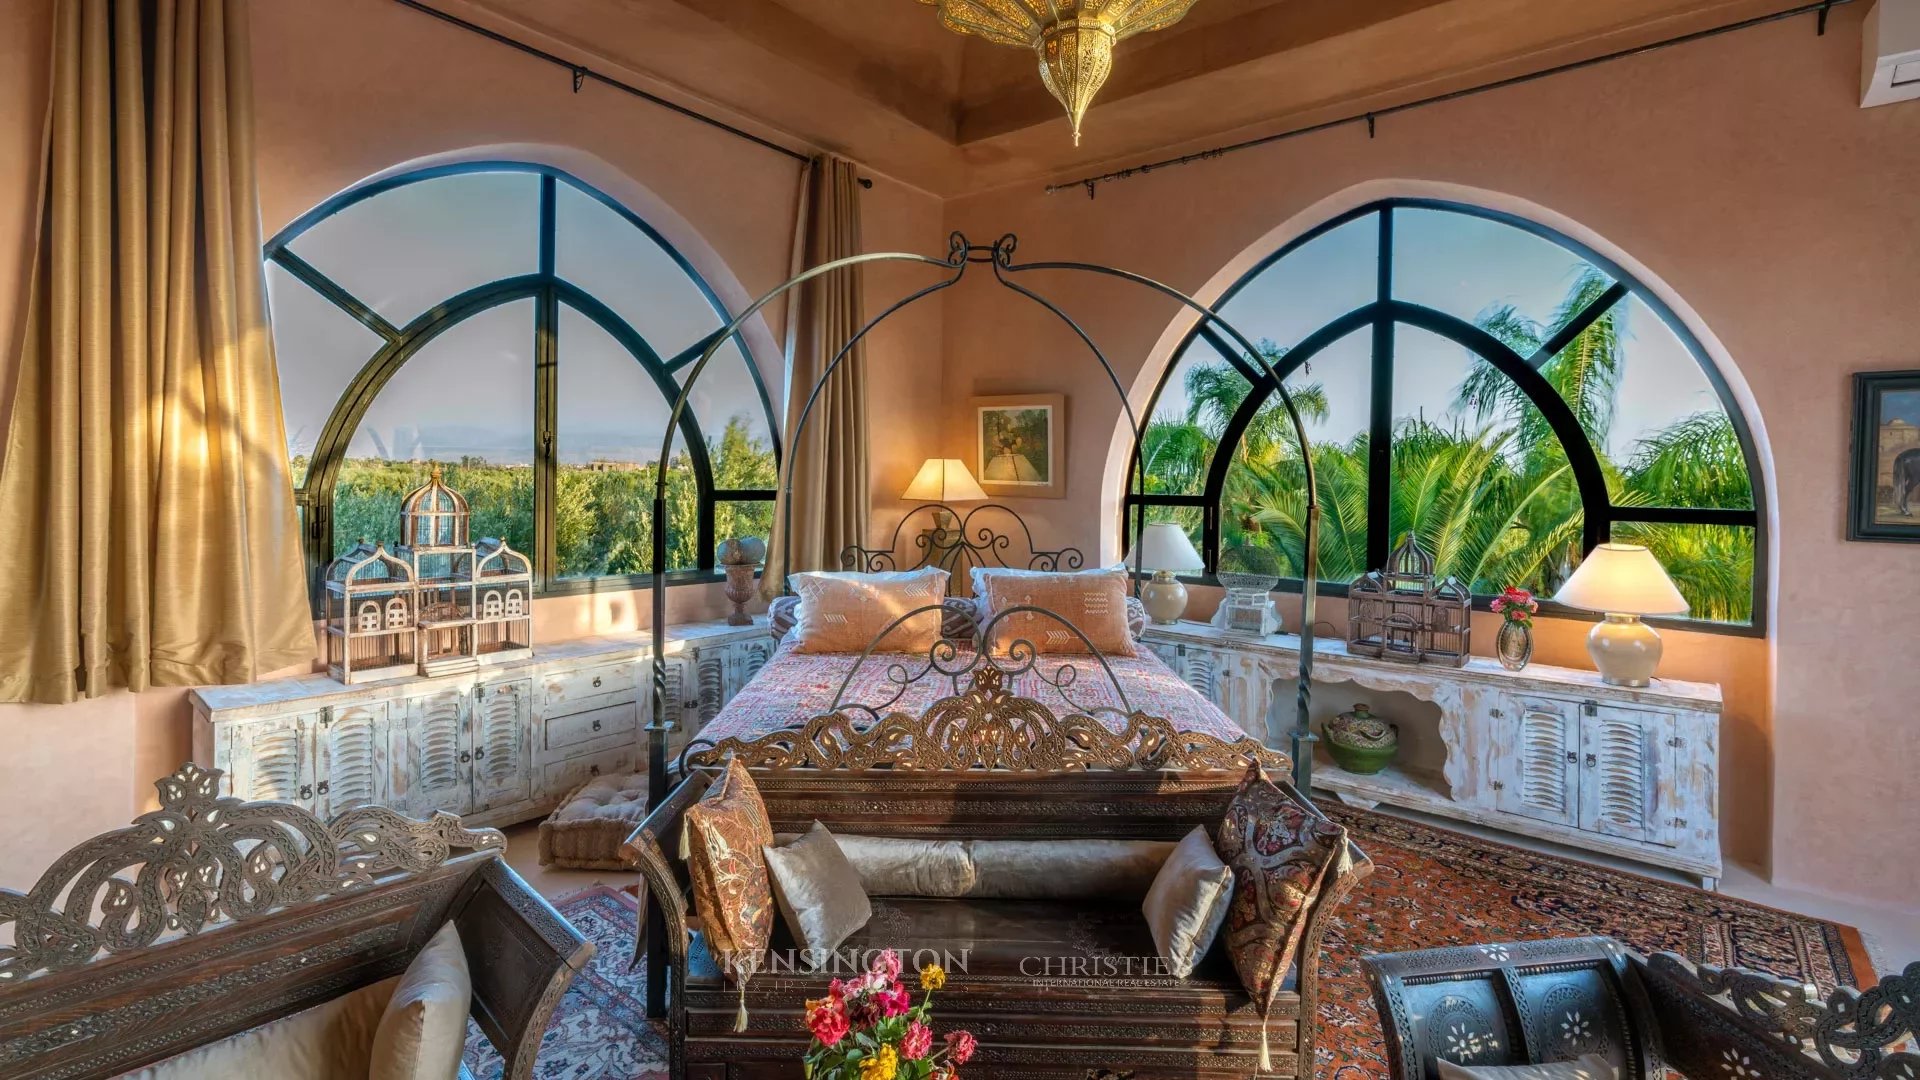 Romeo Palace in Marrakech, Morocco